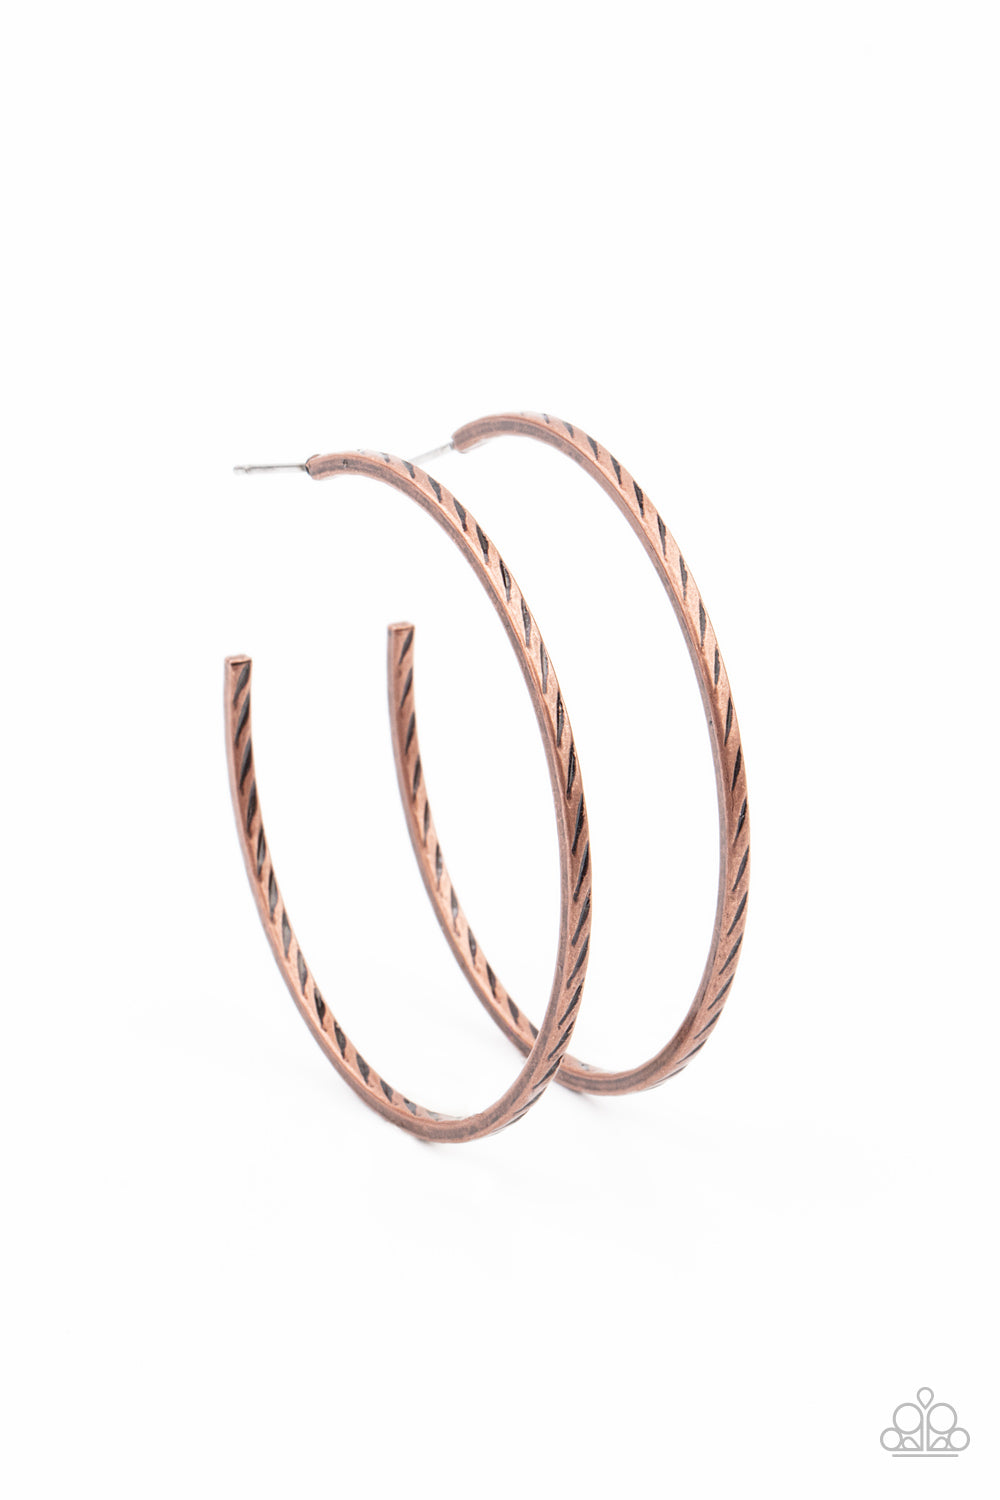 Rural Reserve - Copper Earrings - Paparazzi Accessories